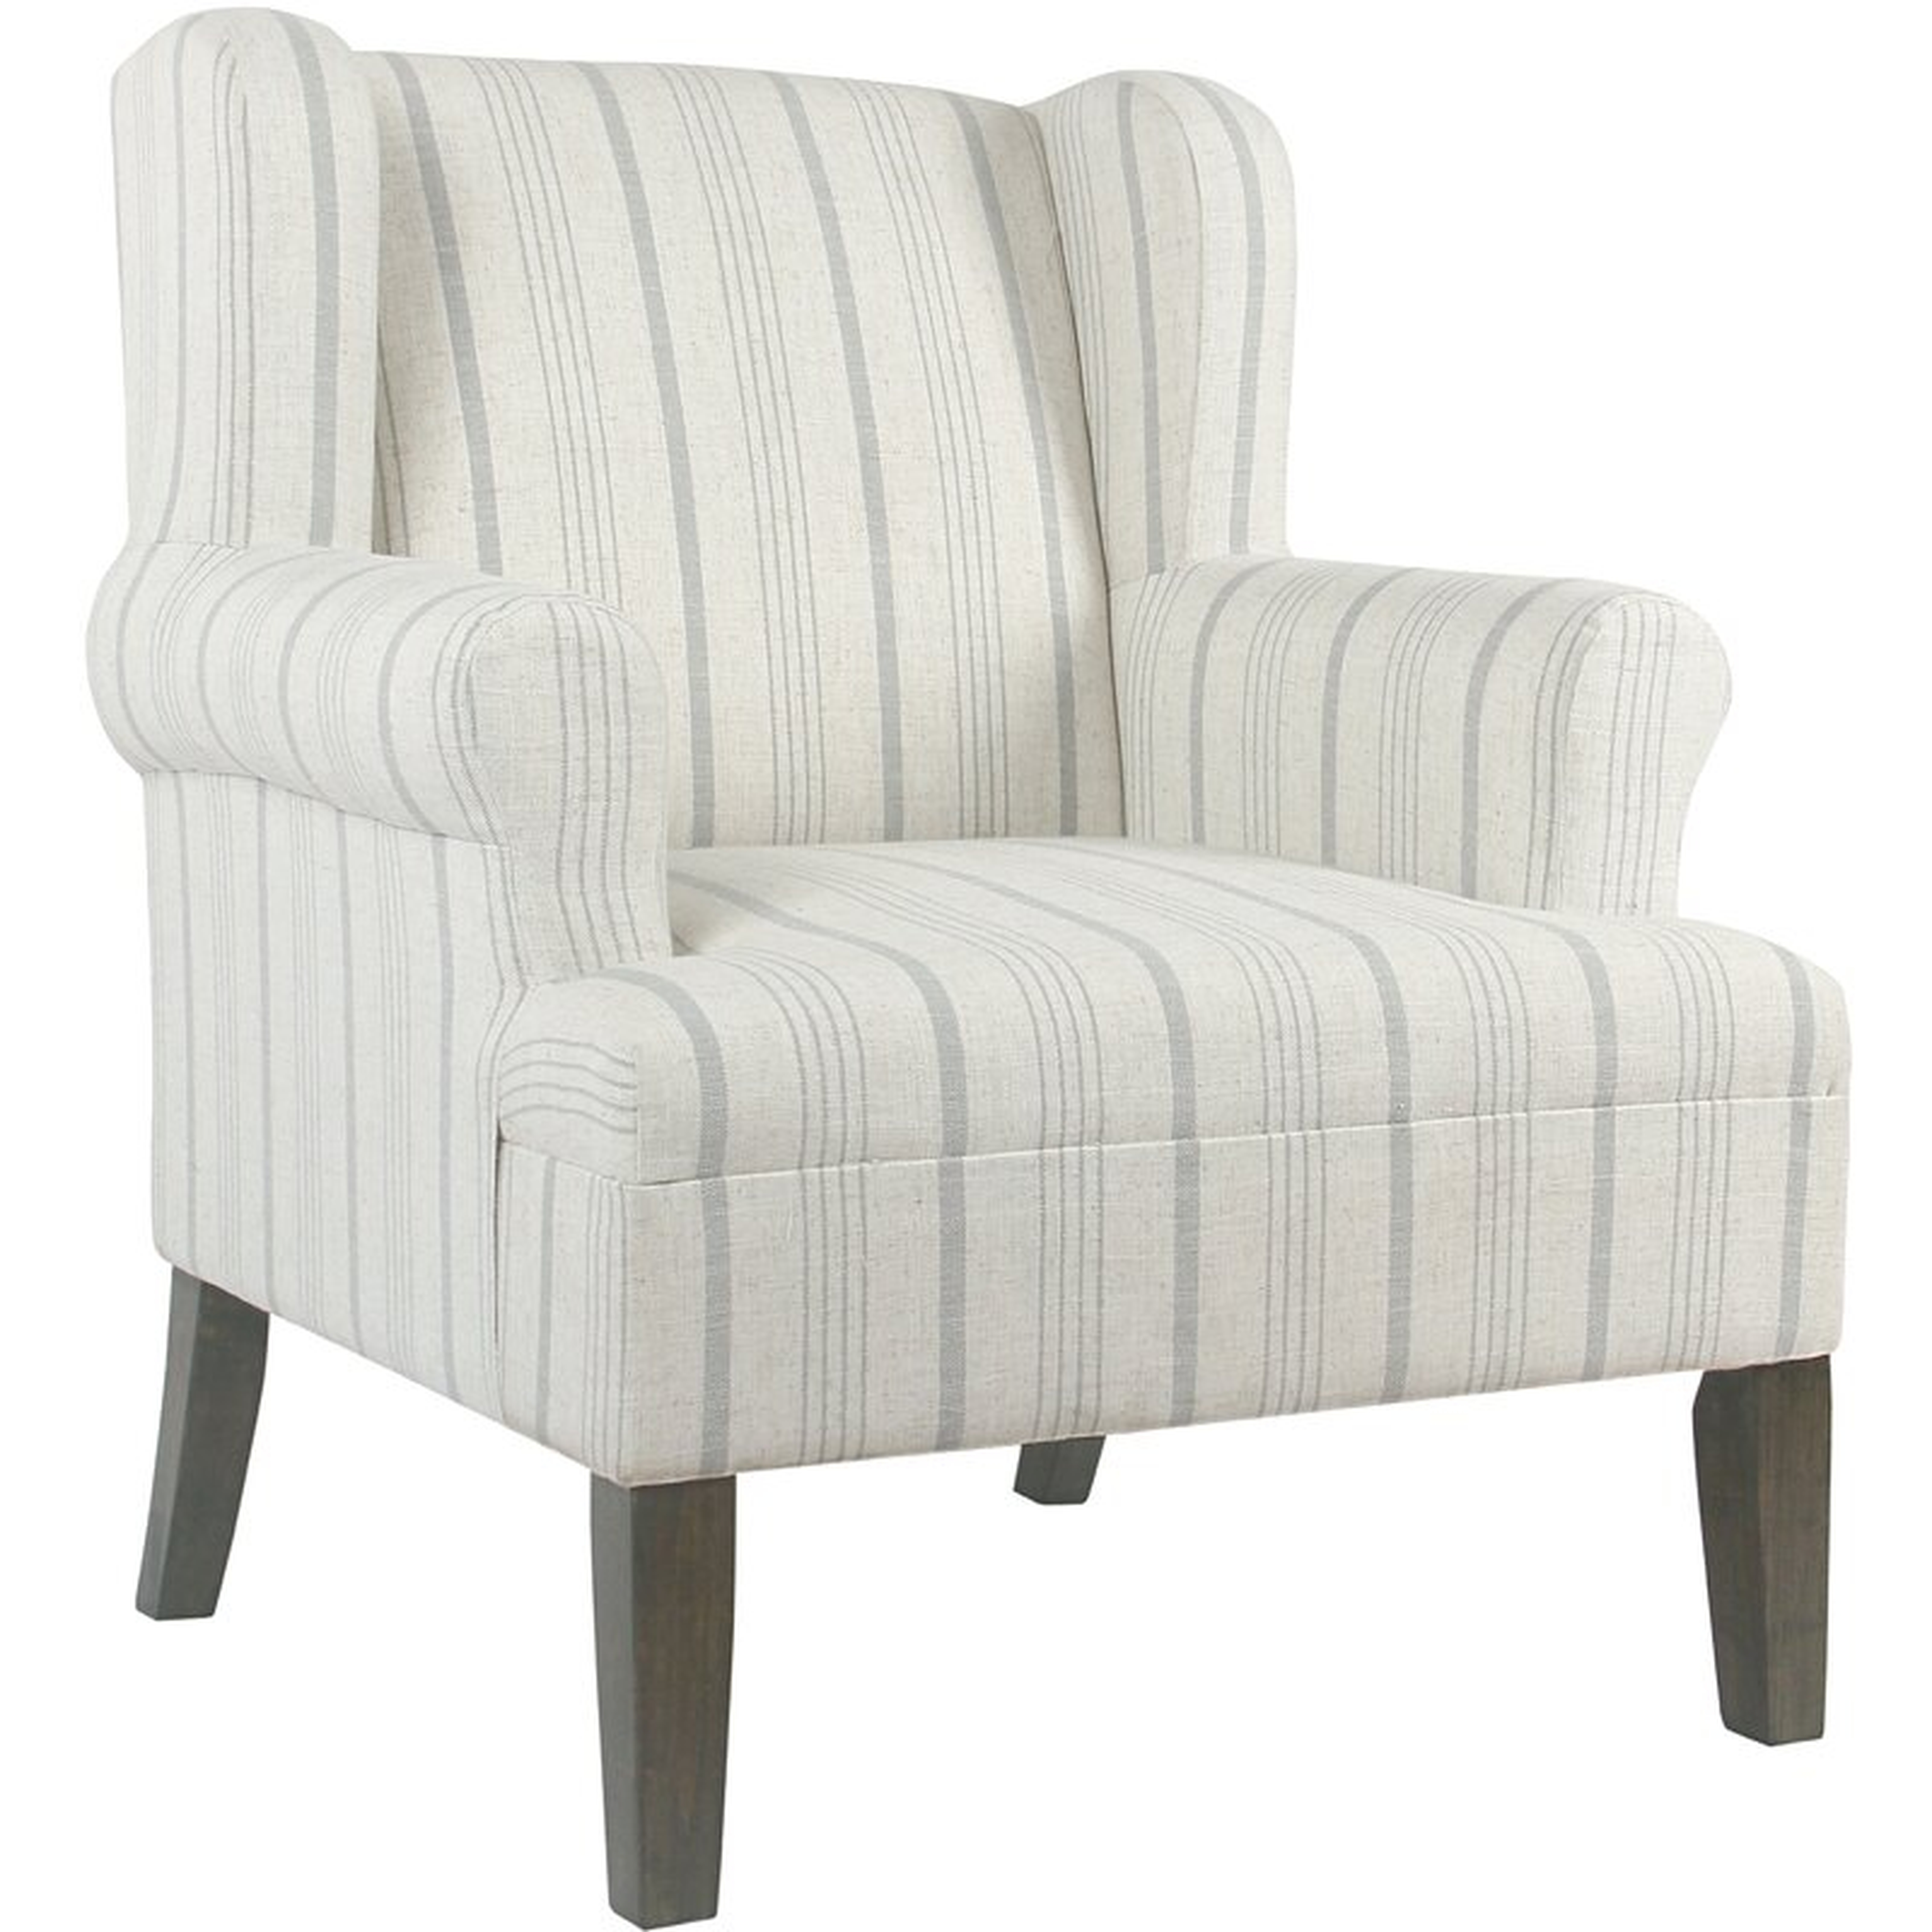 London Wingback Chair - Dove Gray/Gray Washed - Birch Lane